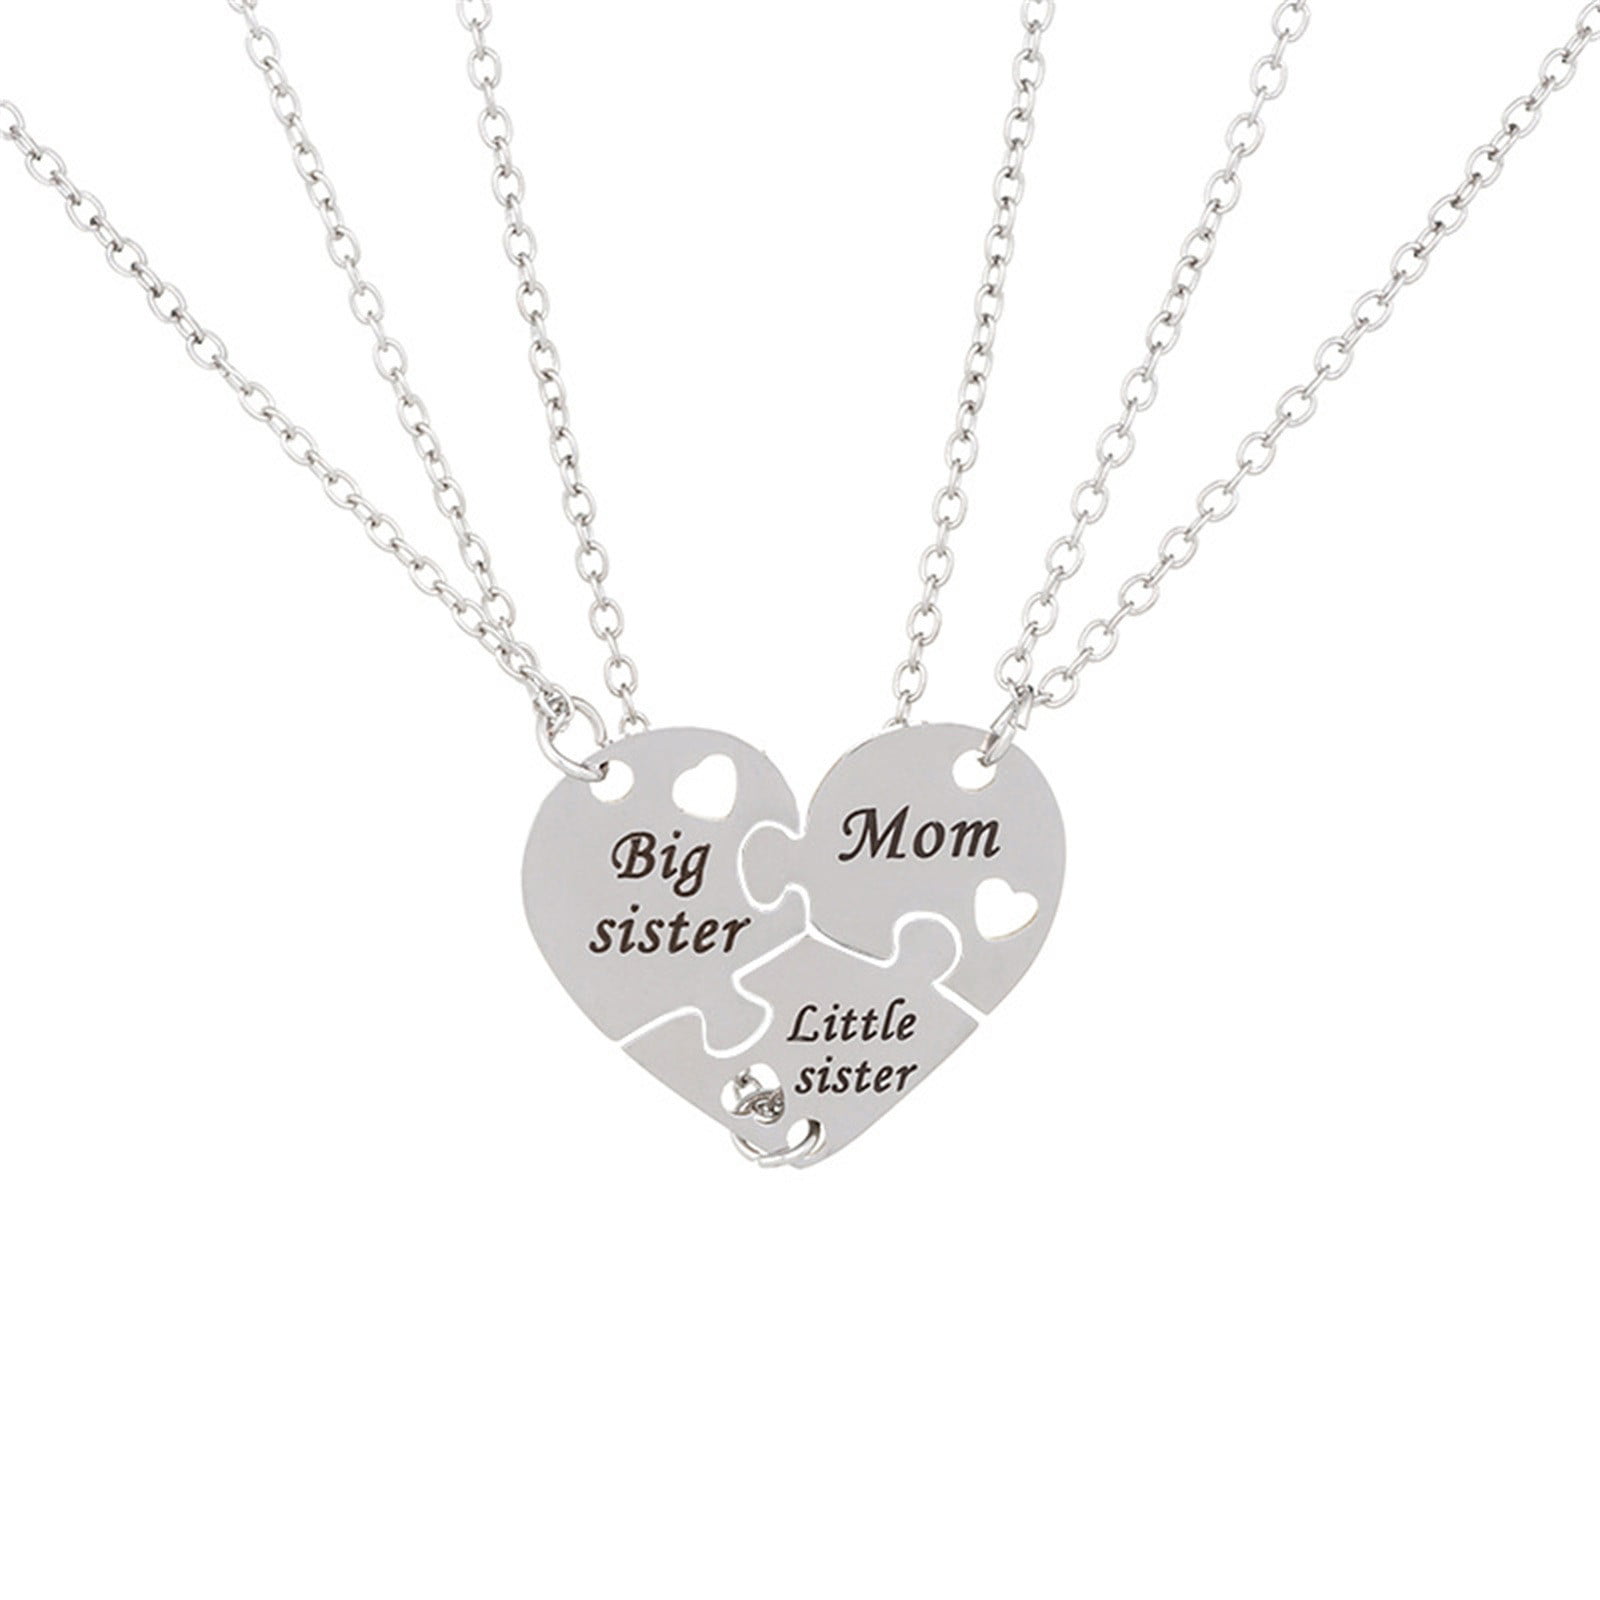 Bloom Where You're Planted - Mother - Daughter or Big Sister - Little Sister  Disc Necklace Sets - GiGisPetals